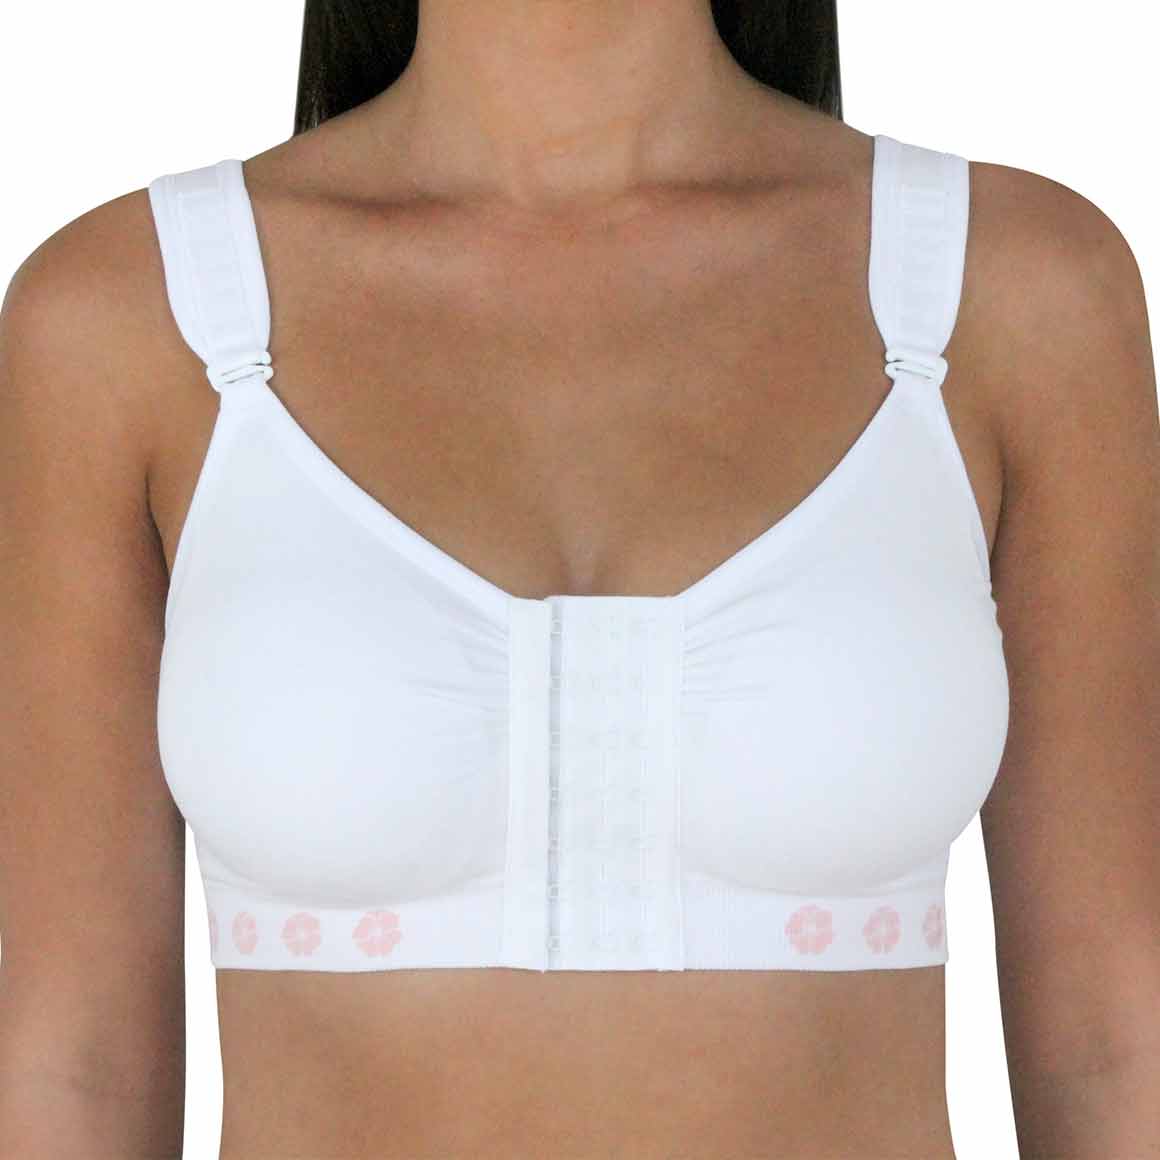 Introducing MACOM post-surgical compression bras